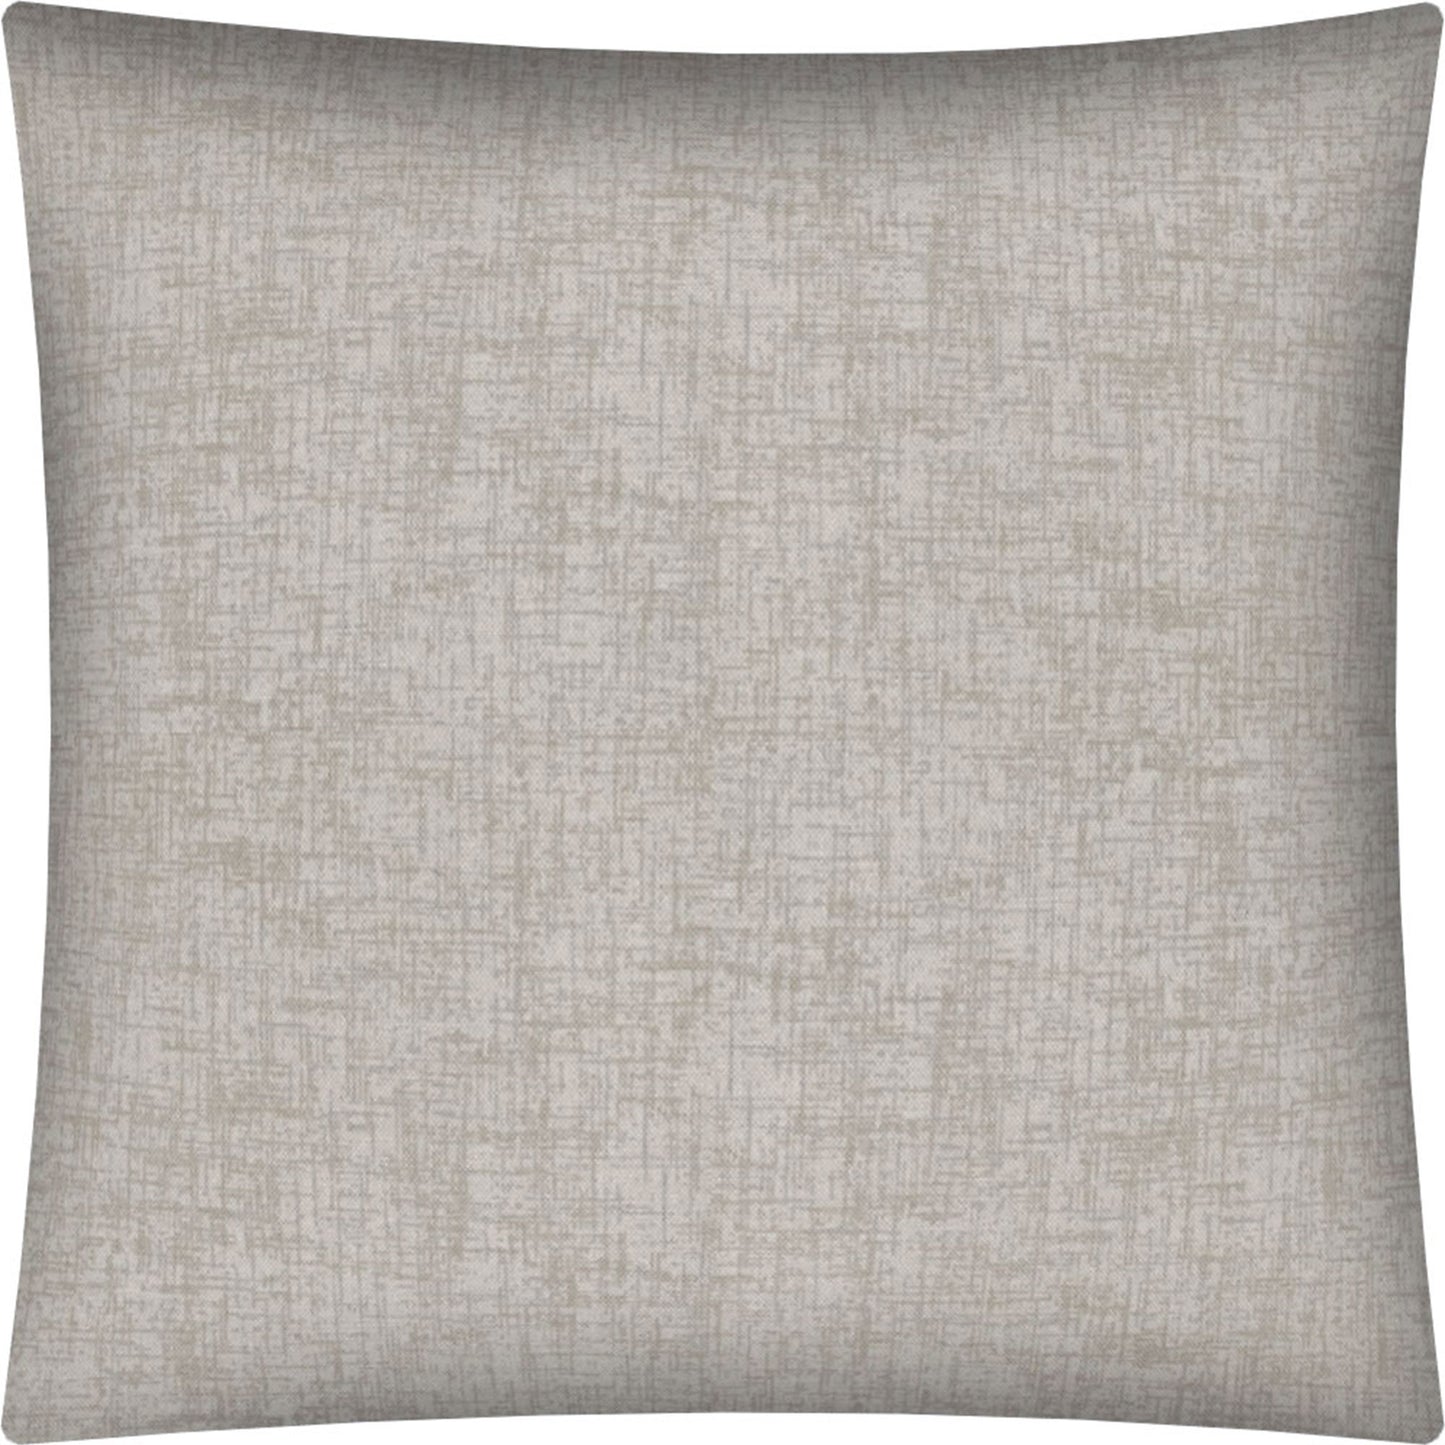 17" X 17" Taupe And Taupe Zippered Solid Color Throw Indoor Outdoor Pillow Cover